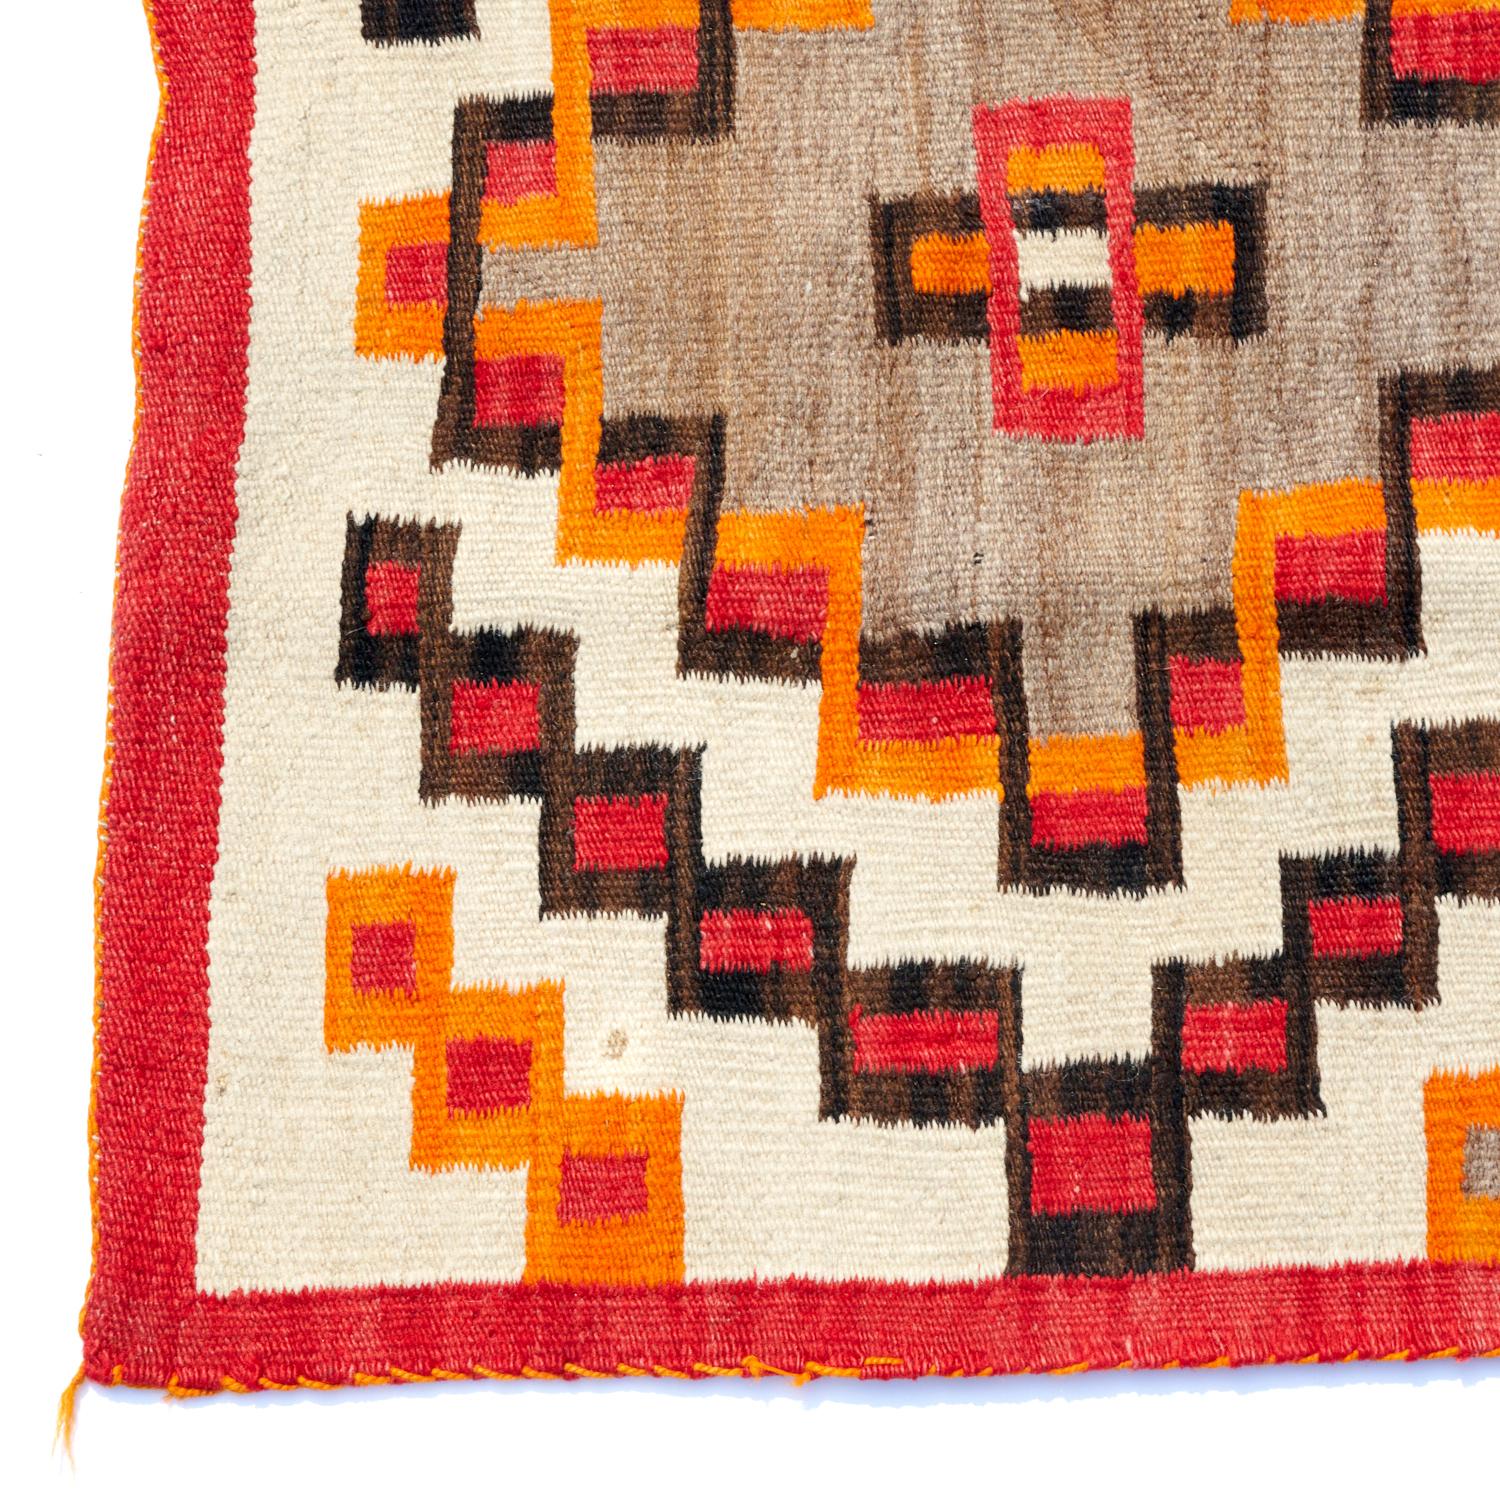 A striking Navajo Fourth Phase rug/wall hanging. Heavy, densely woven wool in a red, black and orange geometric pattern on a cream and brown/grey ground, with orange edging. Lazy lines, a wool warp and side selvage cord are all hallmarks of Navajo